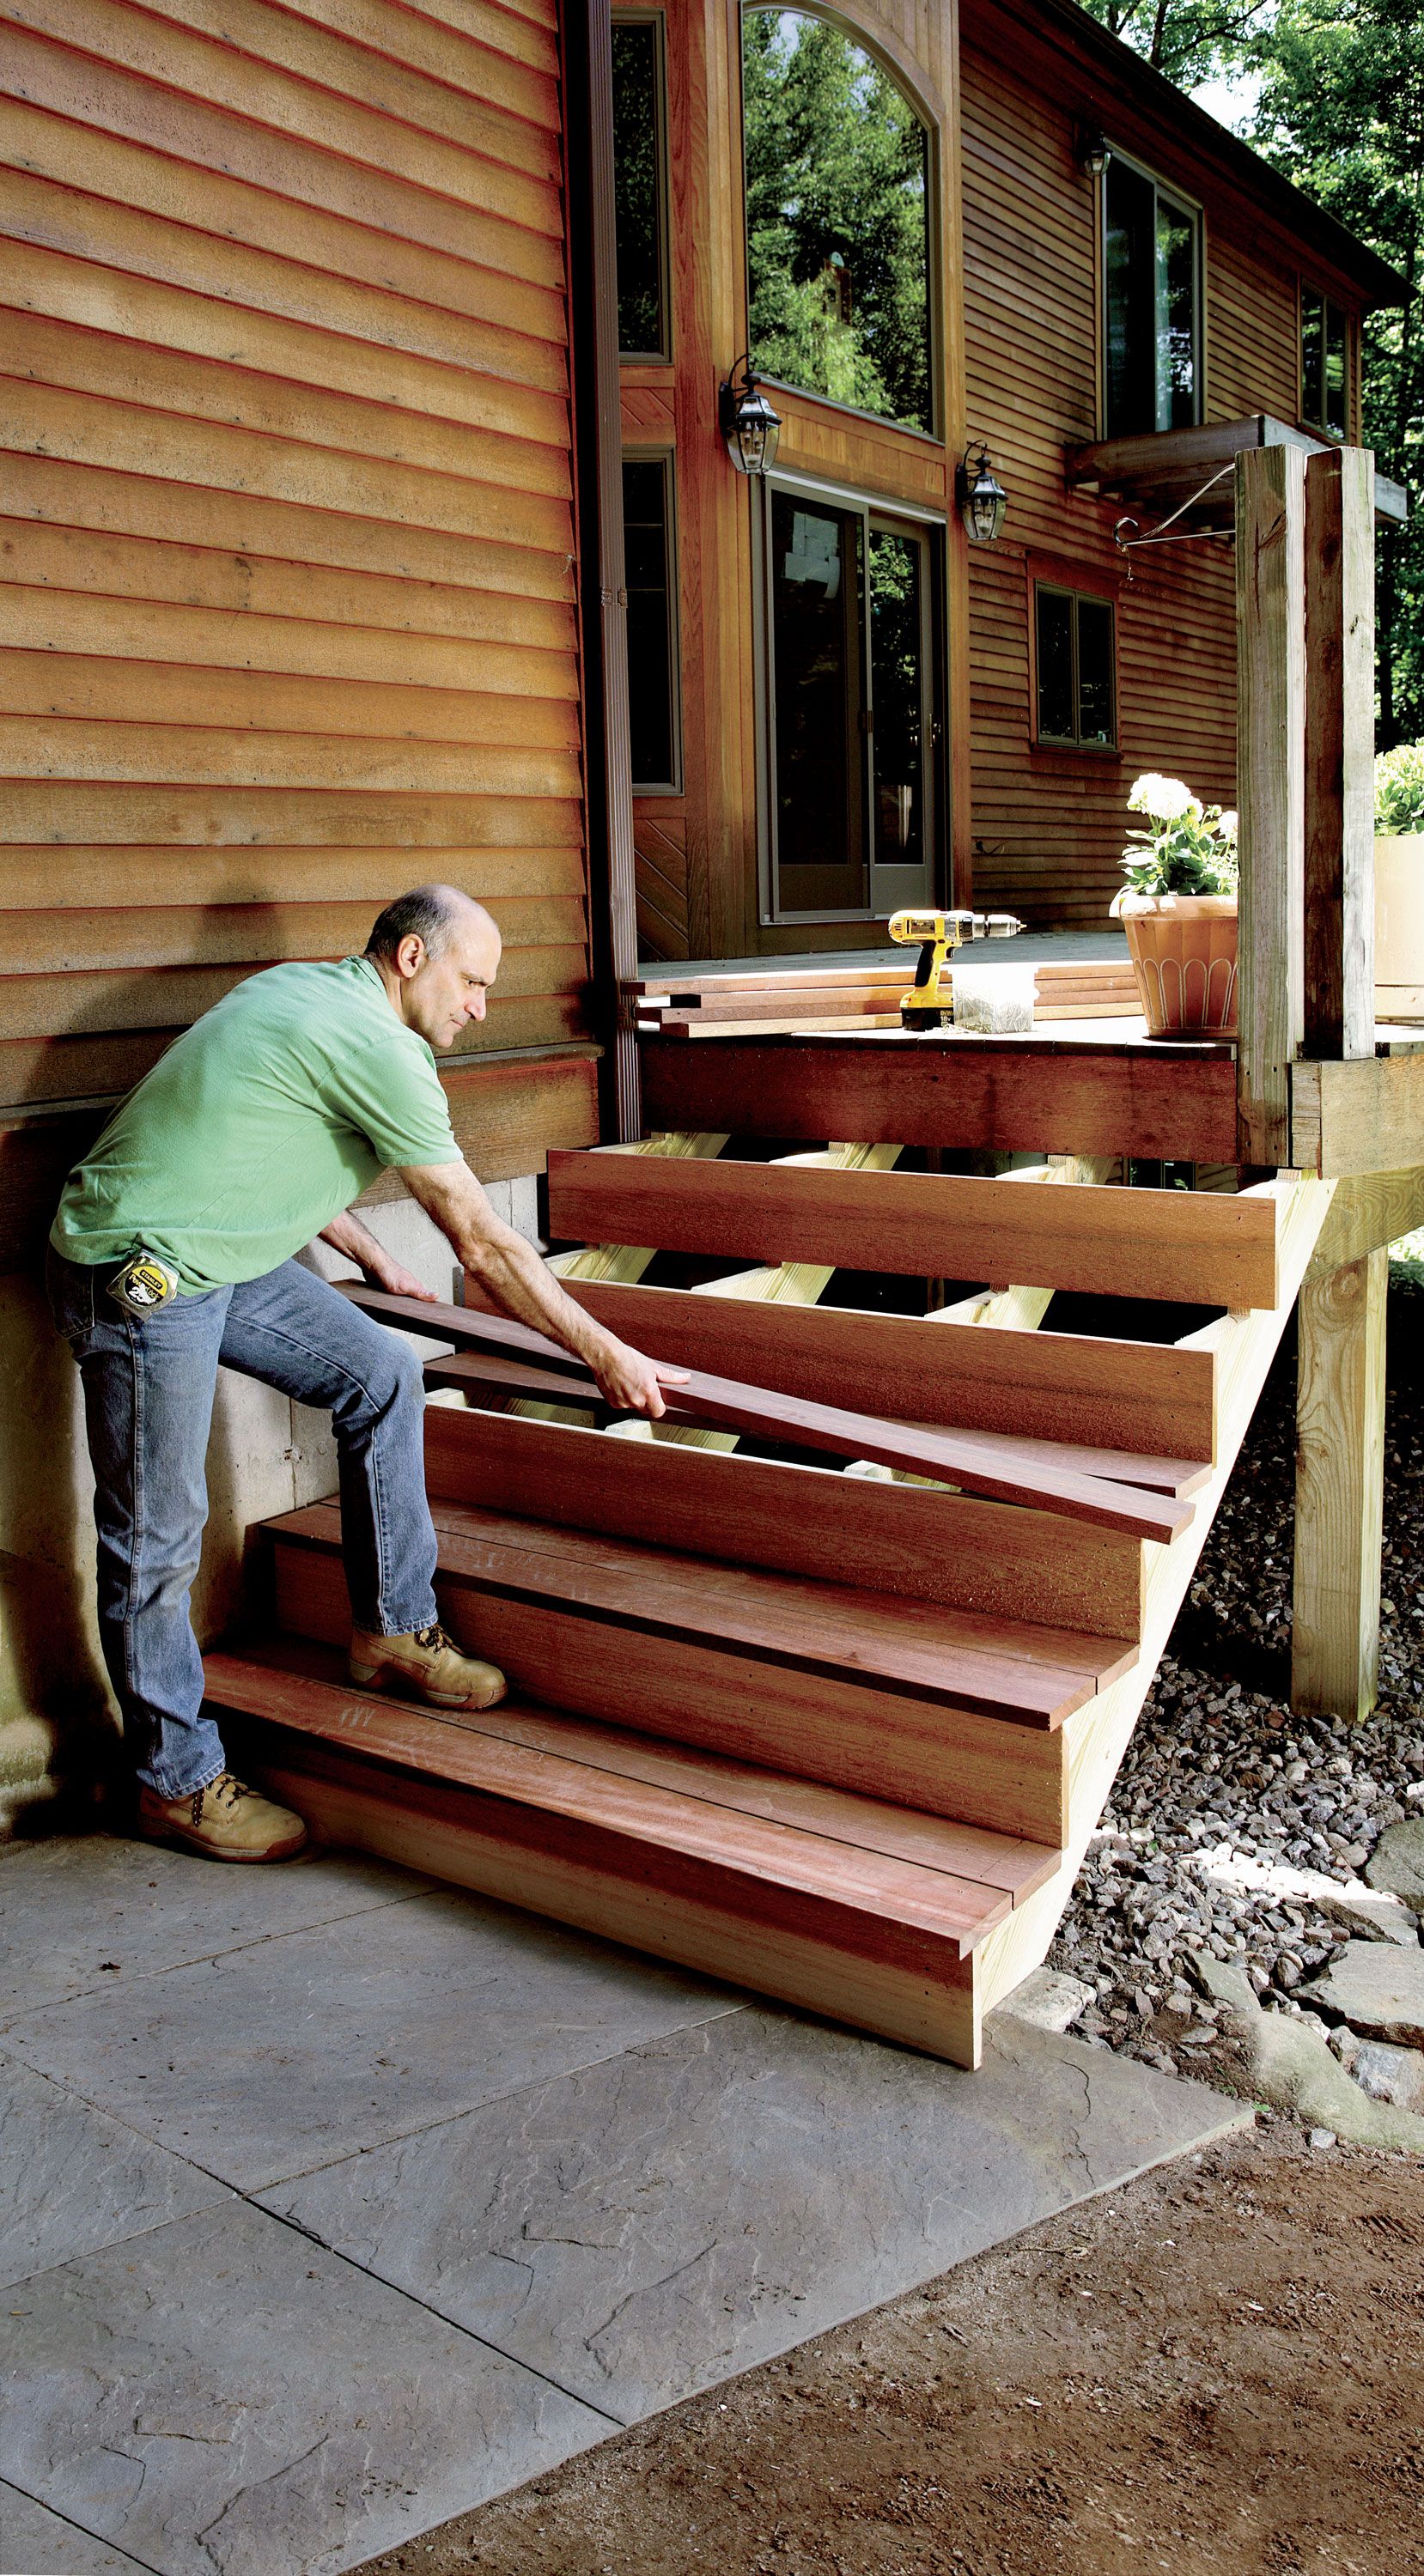 How To Build Stairs Design Plans, How To Build Patio Steps With Wood